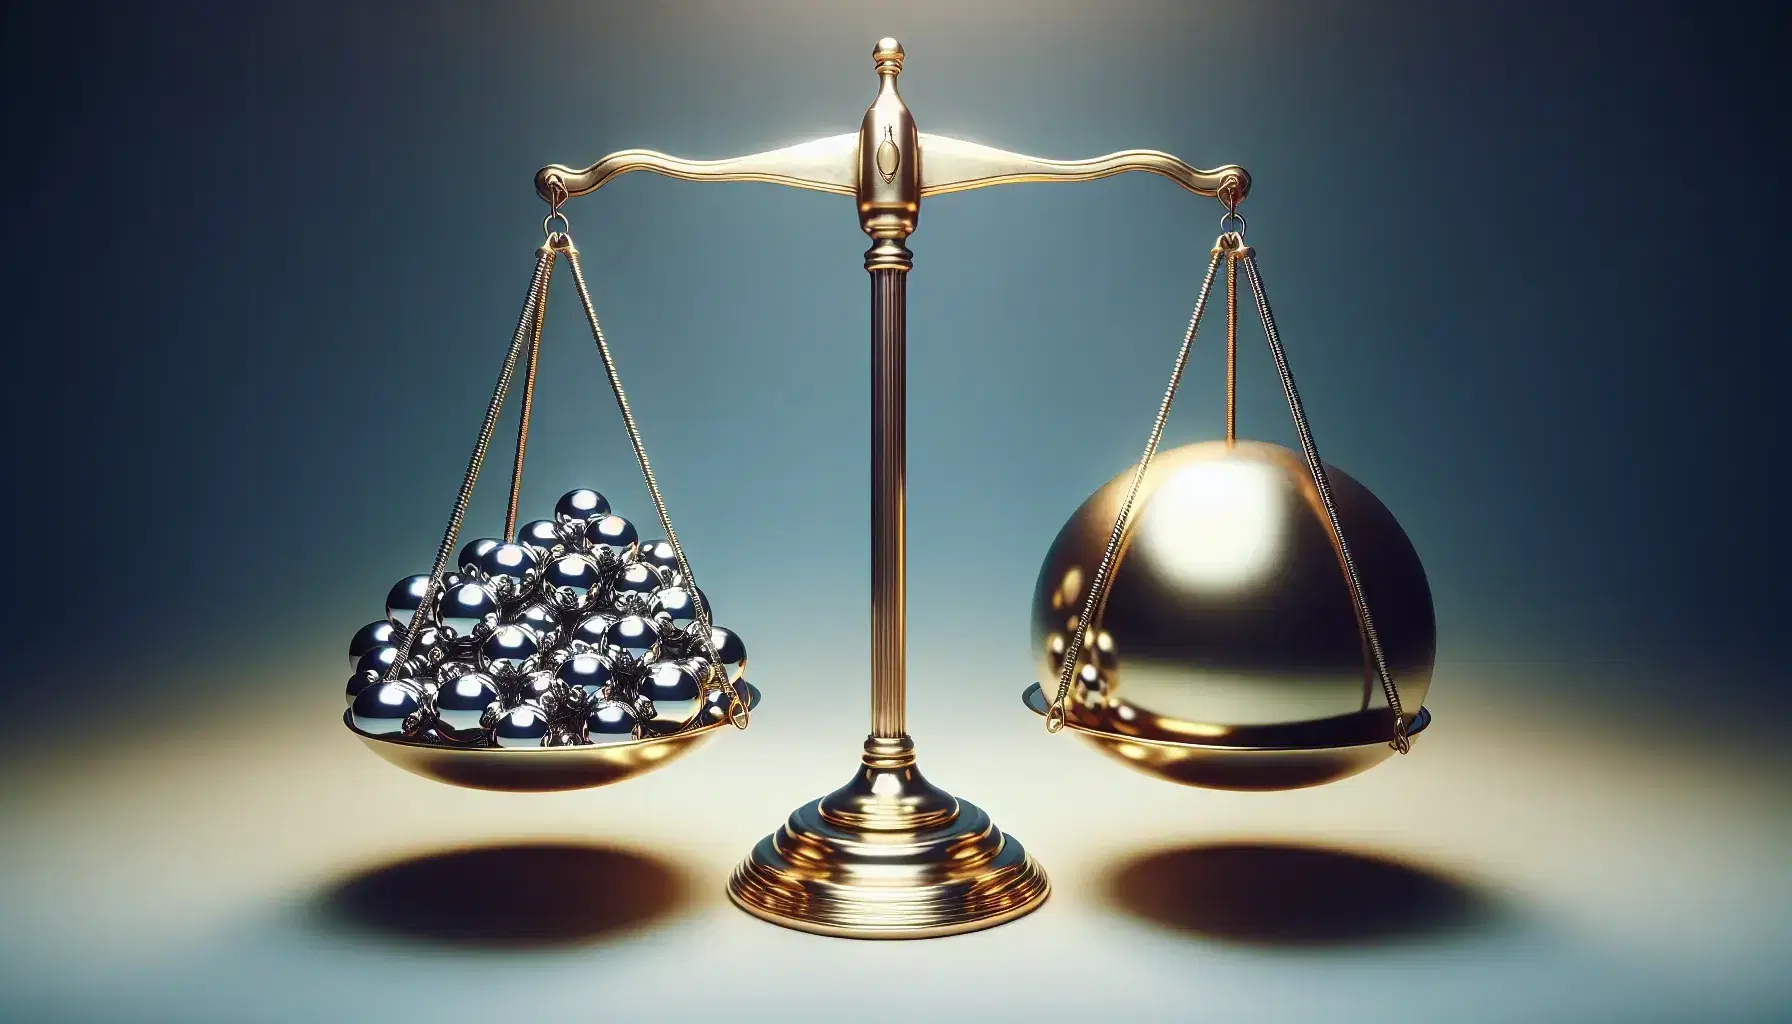 Balanced golden scale with equal-sized pans, one holding multiple silver spheres and the other a single large gold sphere, against a soft blue gradient.